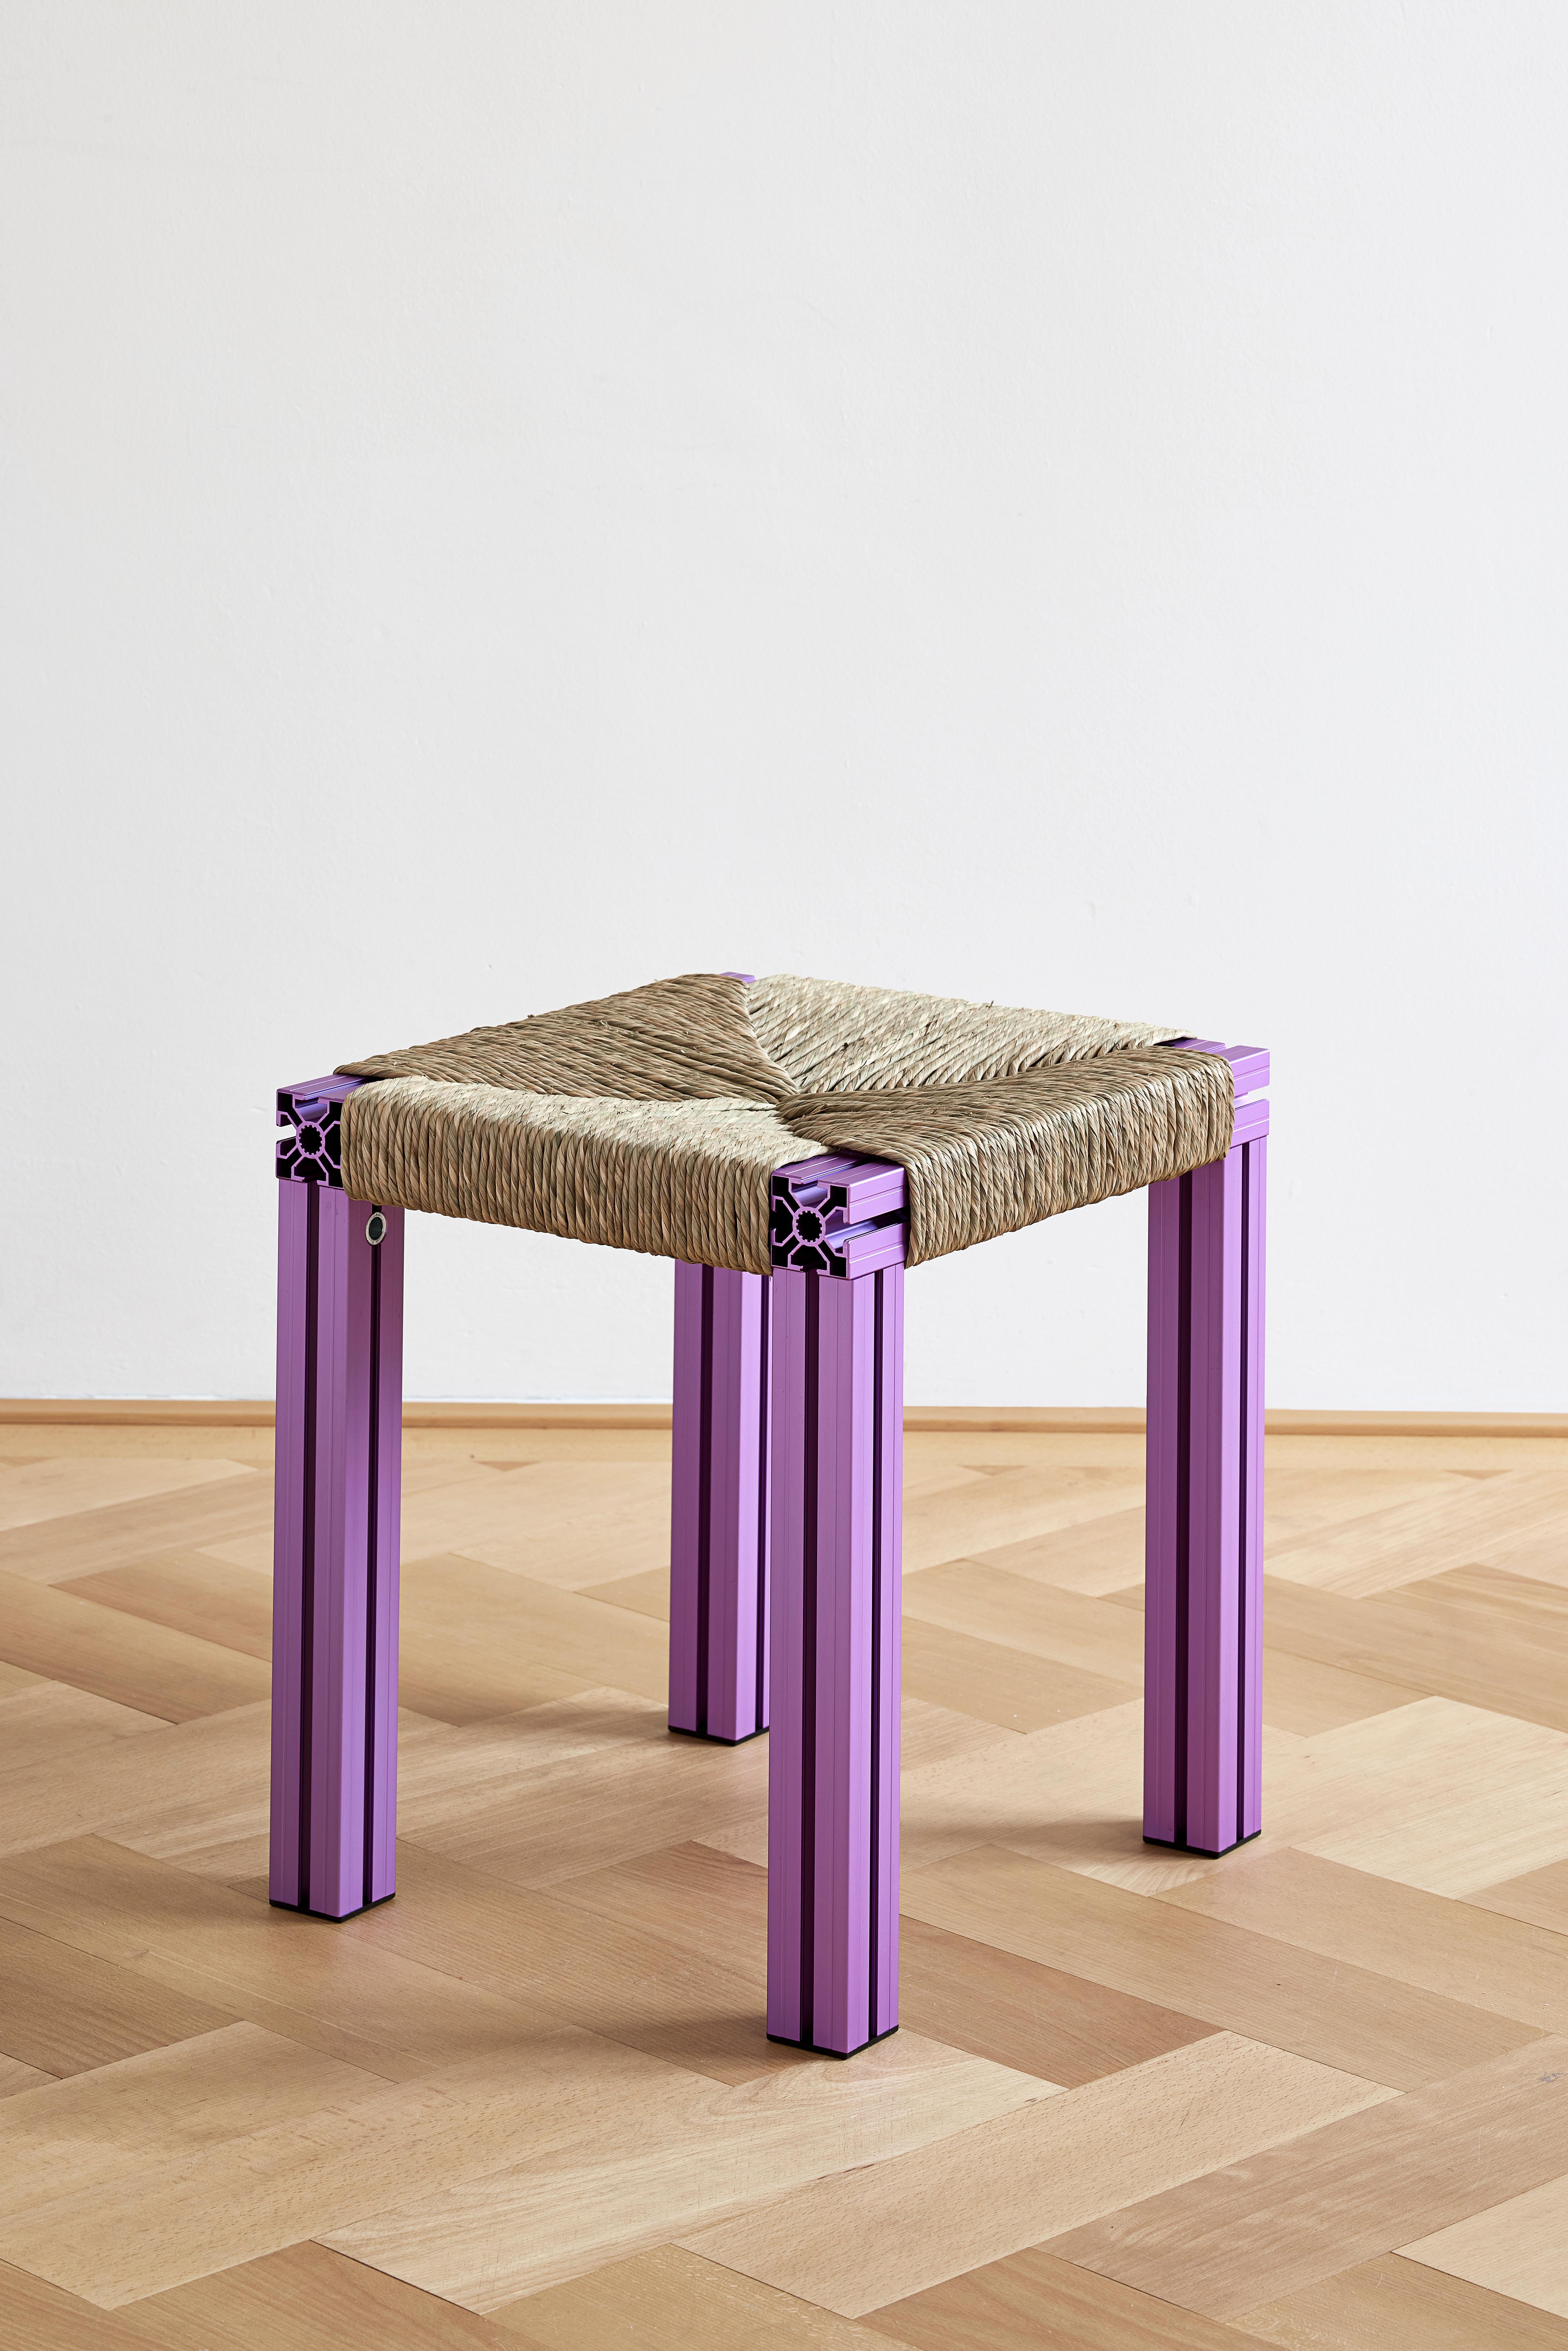 Anodized Grey Aluminium Stool with Reel Rush Seating from Anodised Wicker Collection For Sale